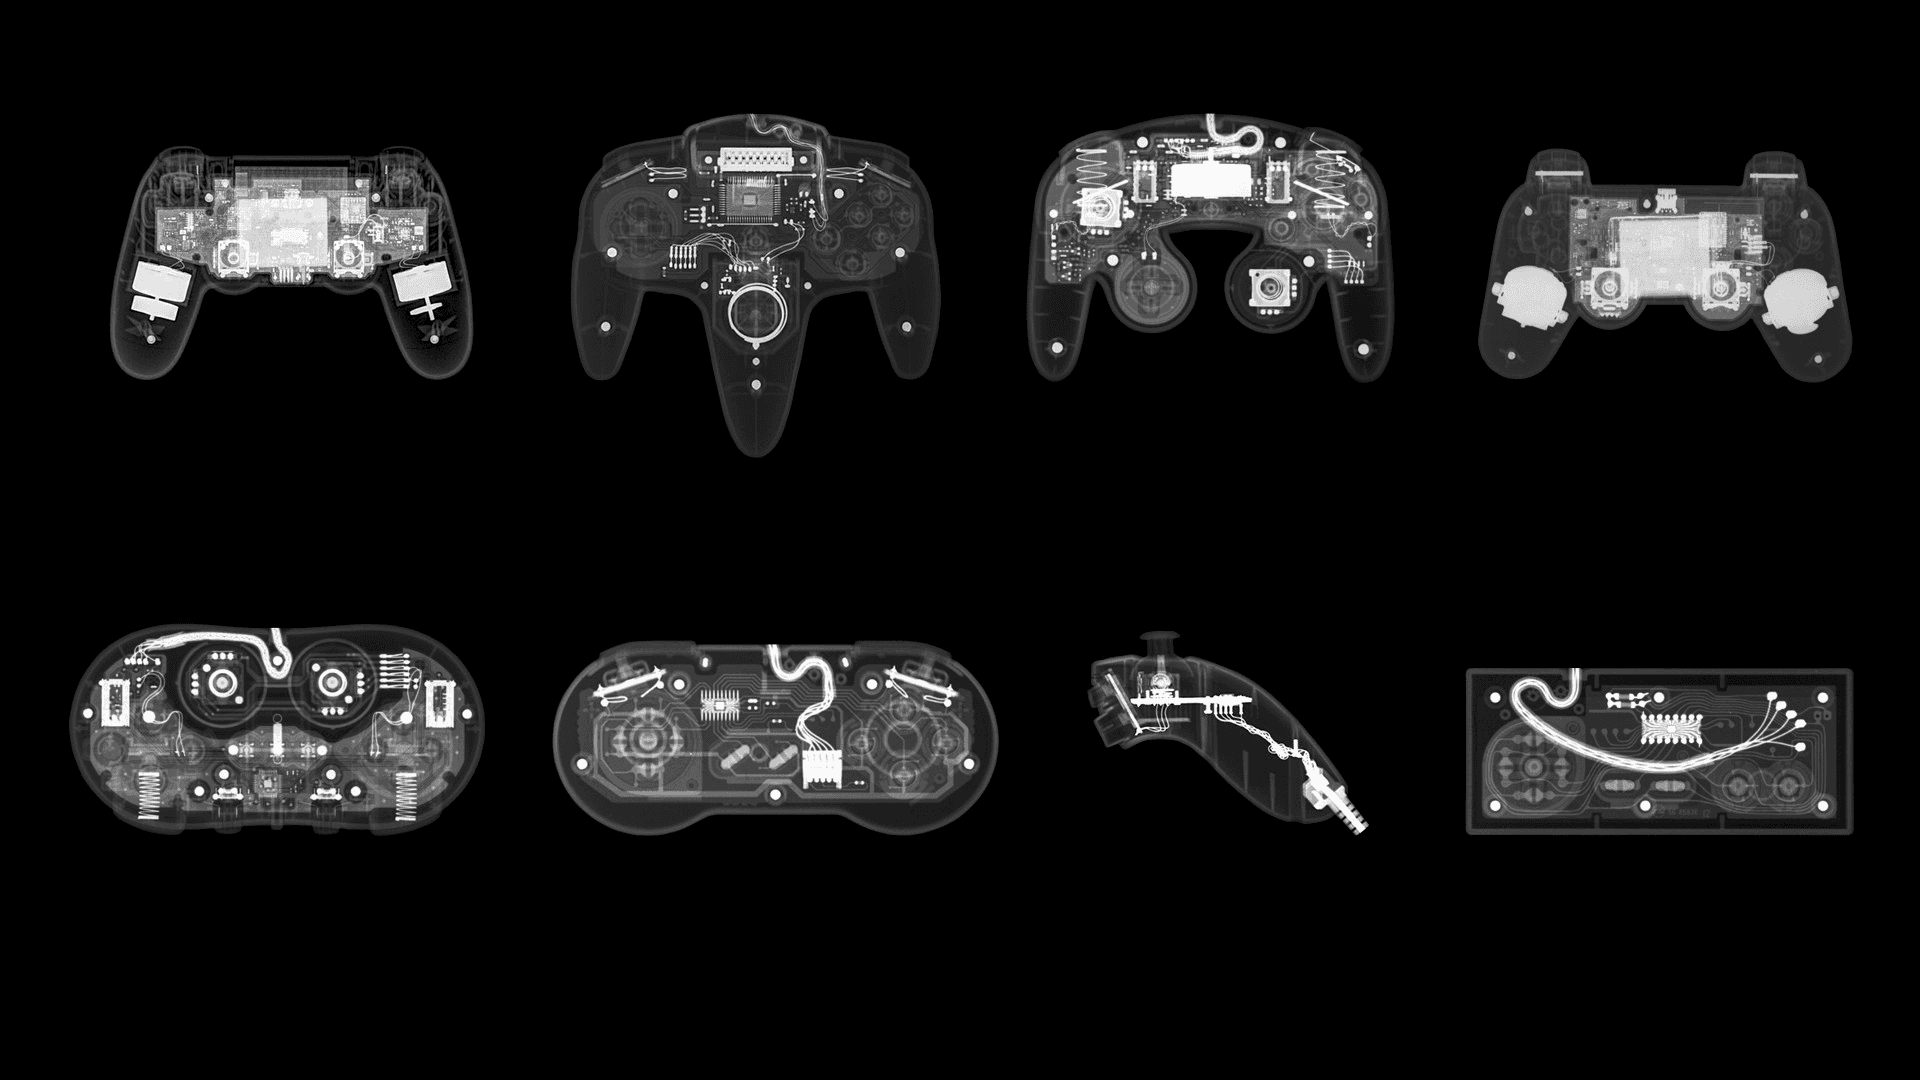 A Black And White Image Of Several Different Game Controllers